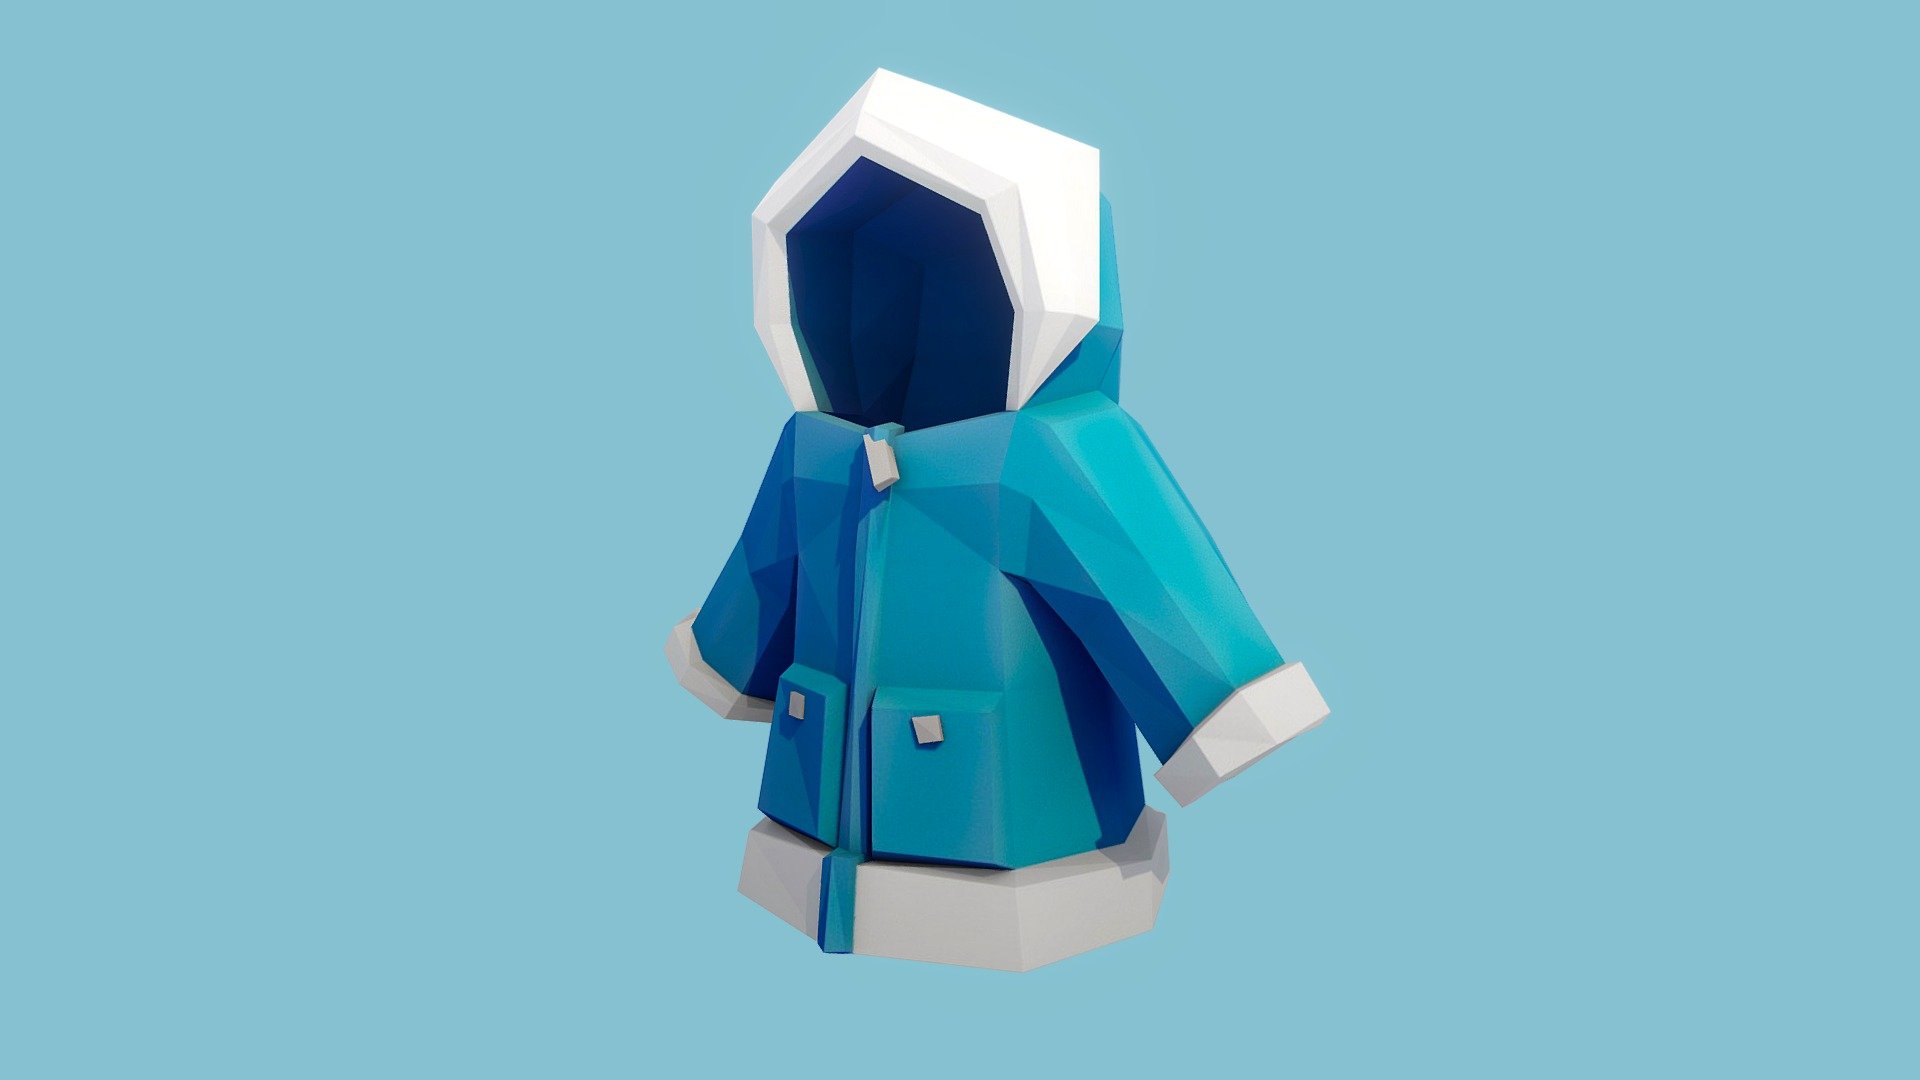 A low poly winter coat made in two hours for #3December. Baked in maya and textured in Substance Painter 3d model